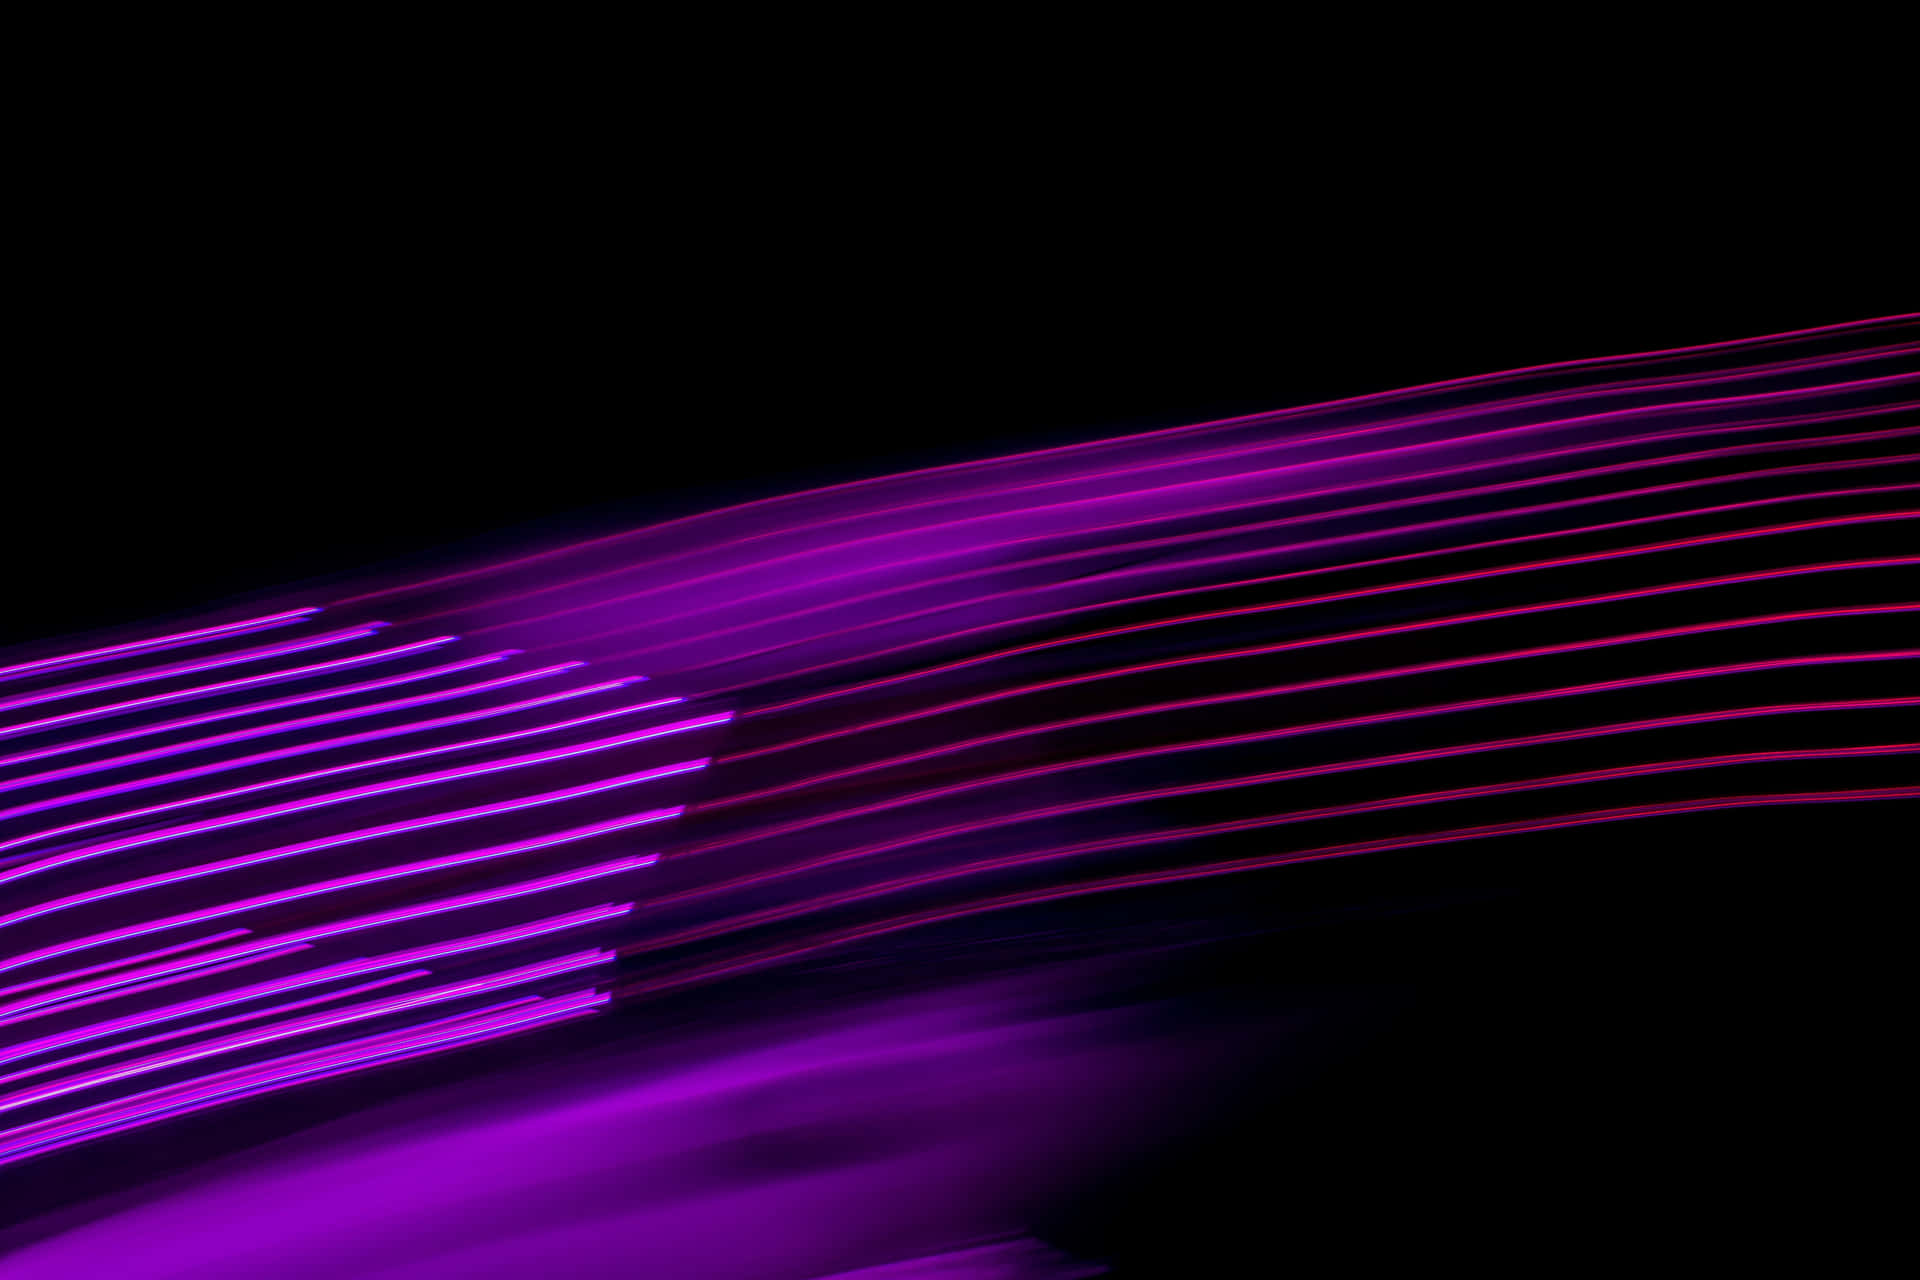 Brighten up your day with a purple neon background!